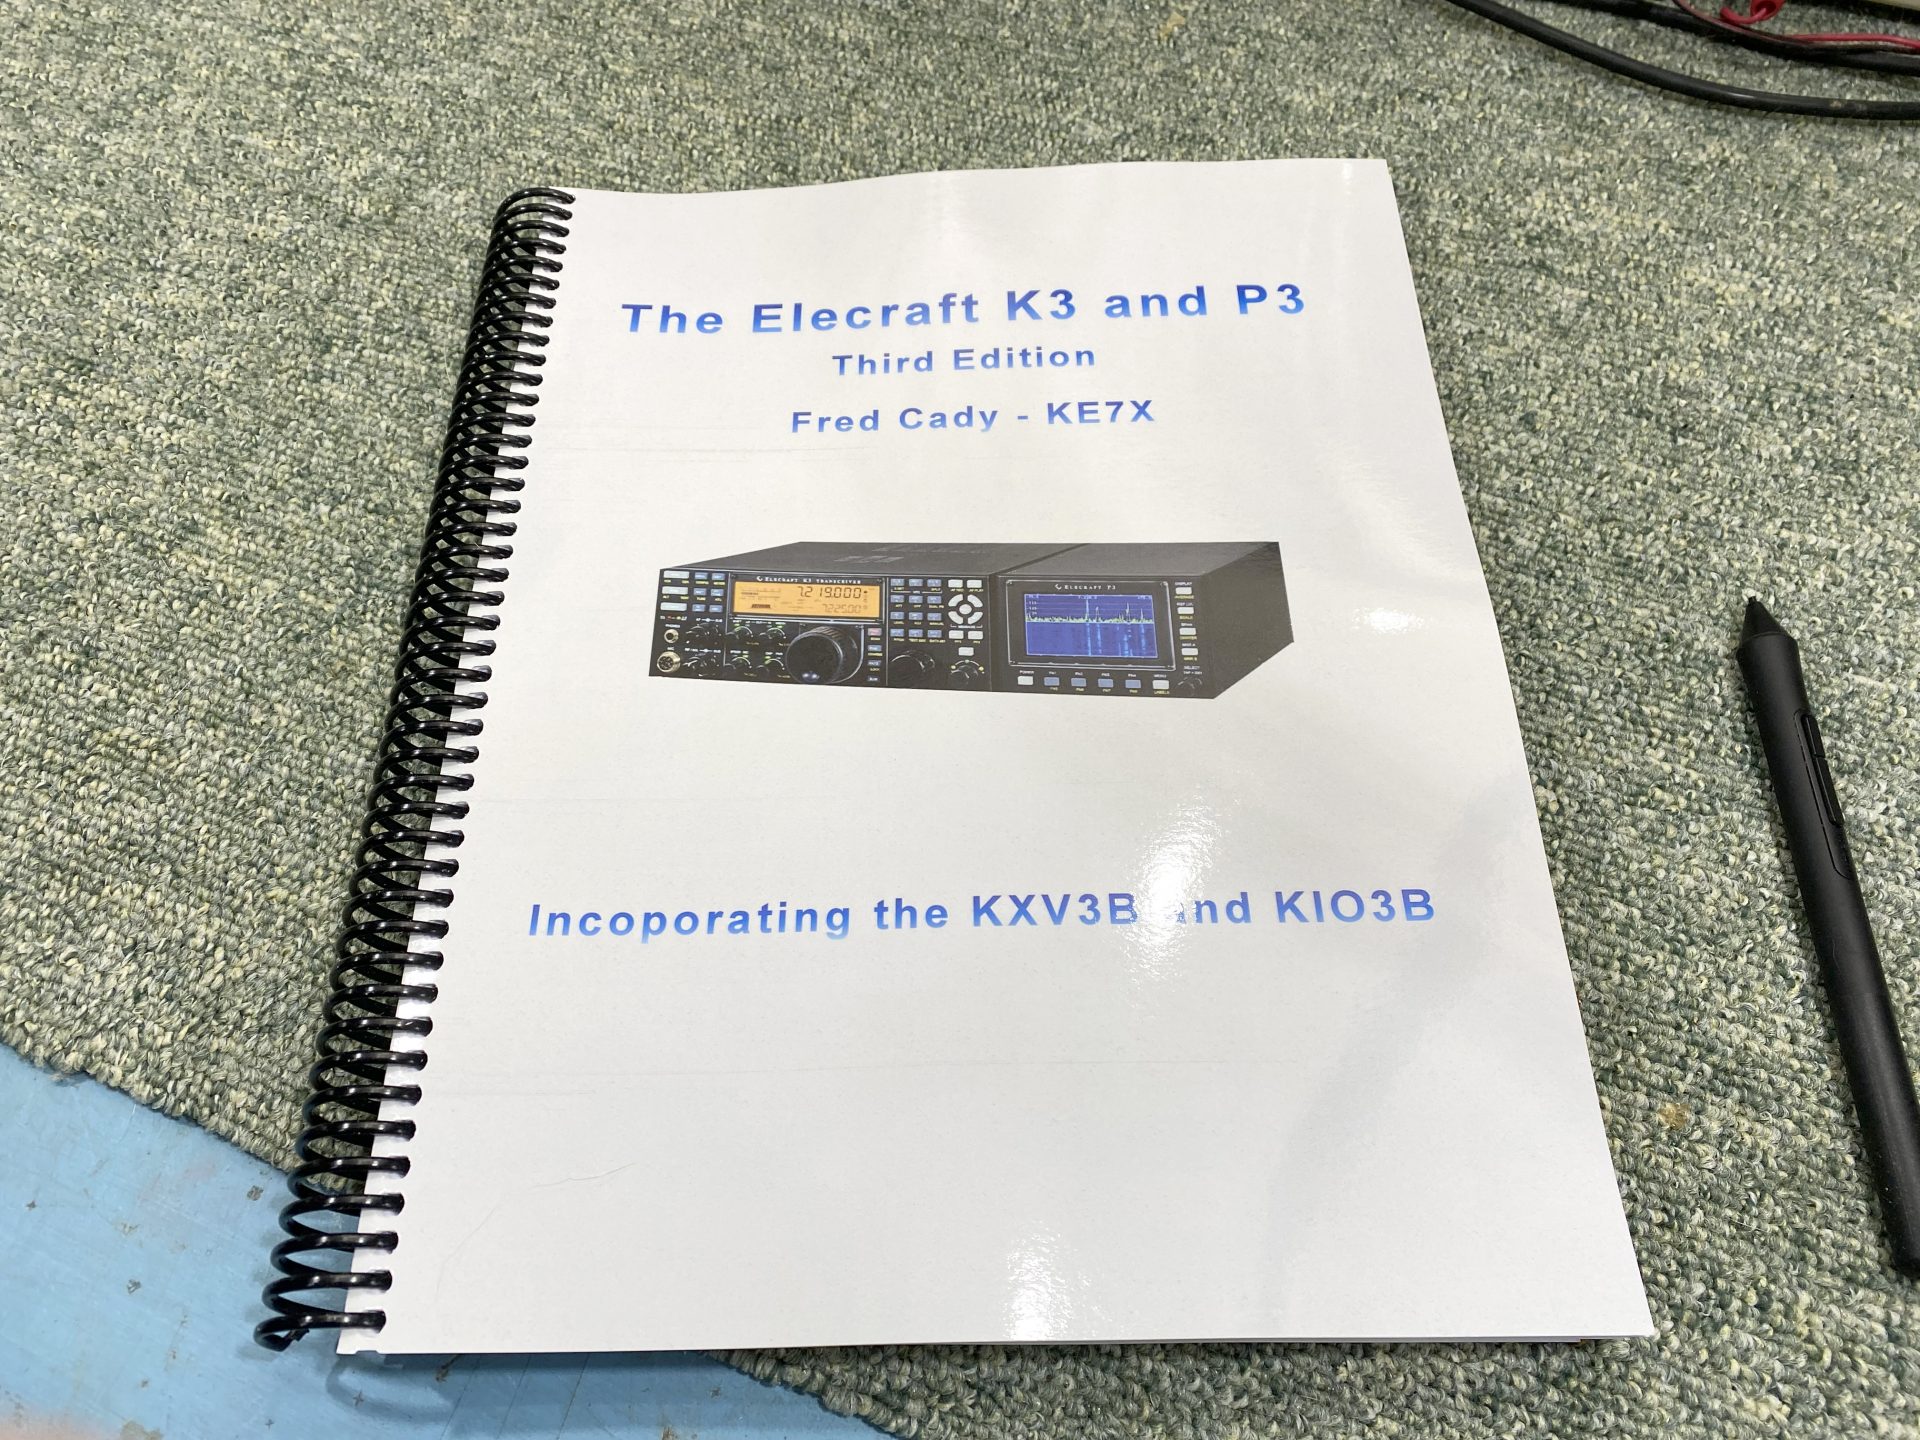 The Elecraft K3 and P3 Manual (3rd Edition) by Fred Cady (KE7X)